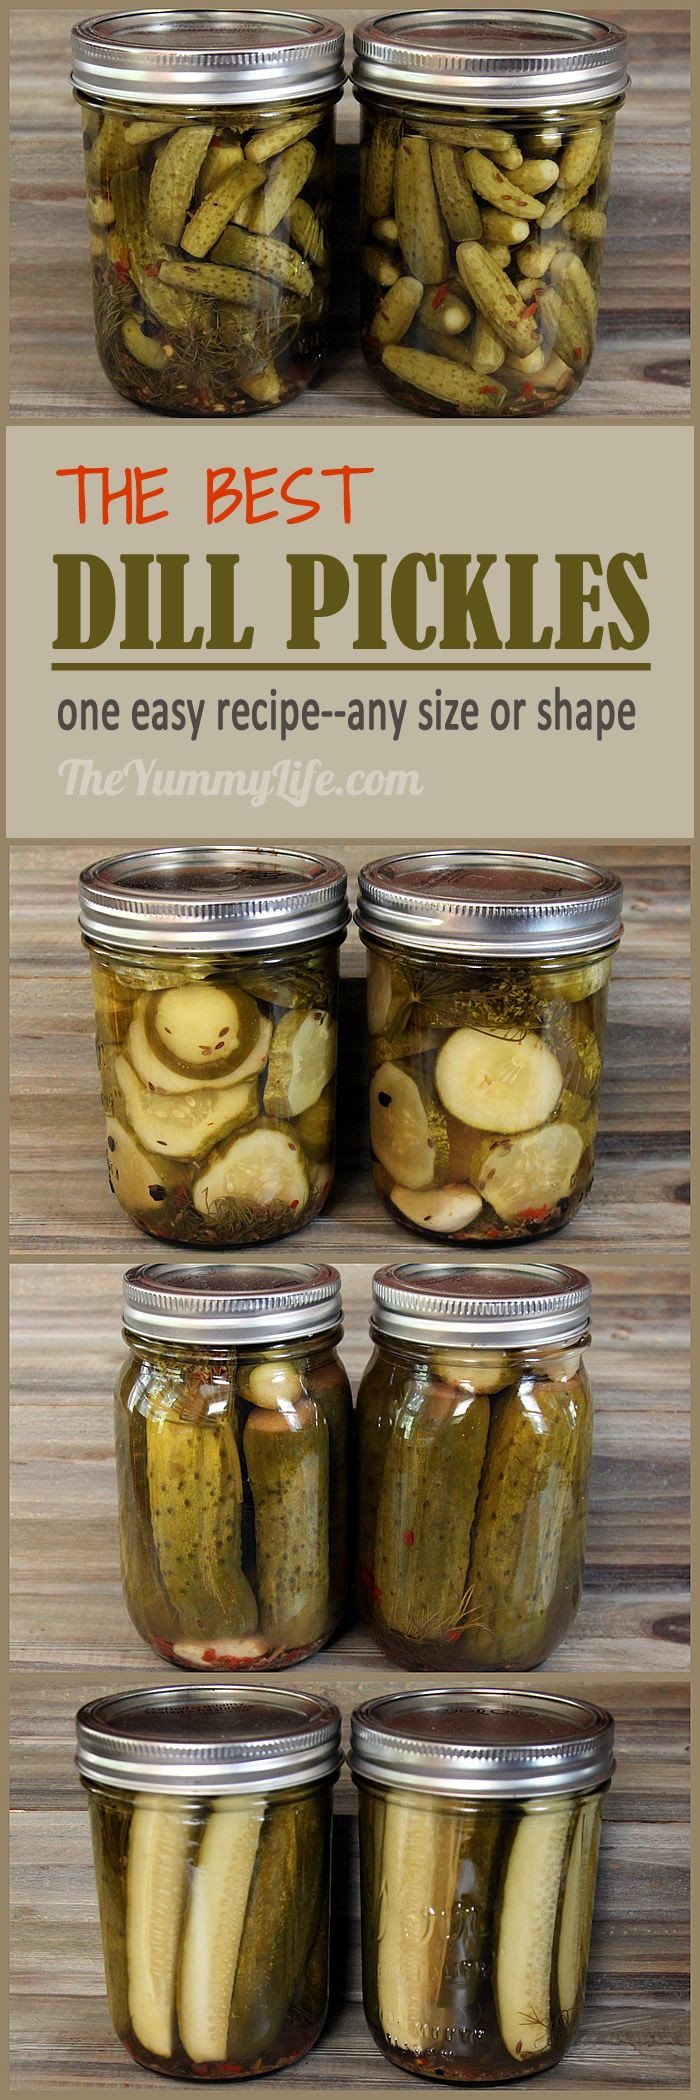 Dill Pickles Recipe For Canning
 The Best Dill Pickles